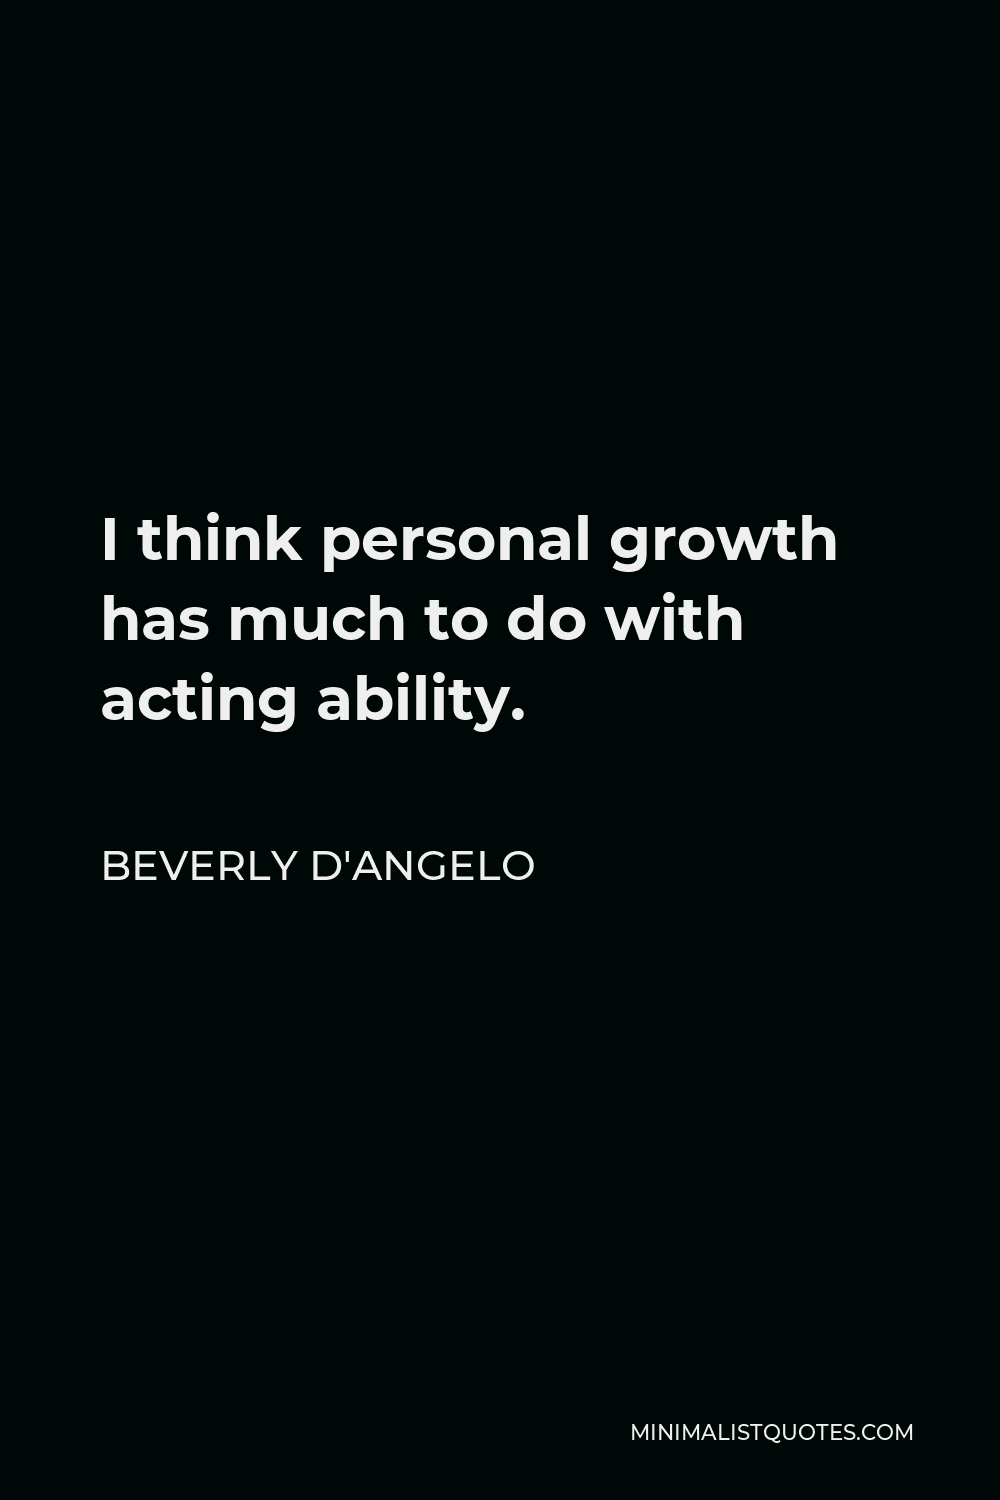 Beverly D'Angelo Quote - I think personal growth has much to do with acting ability.